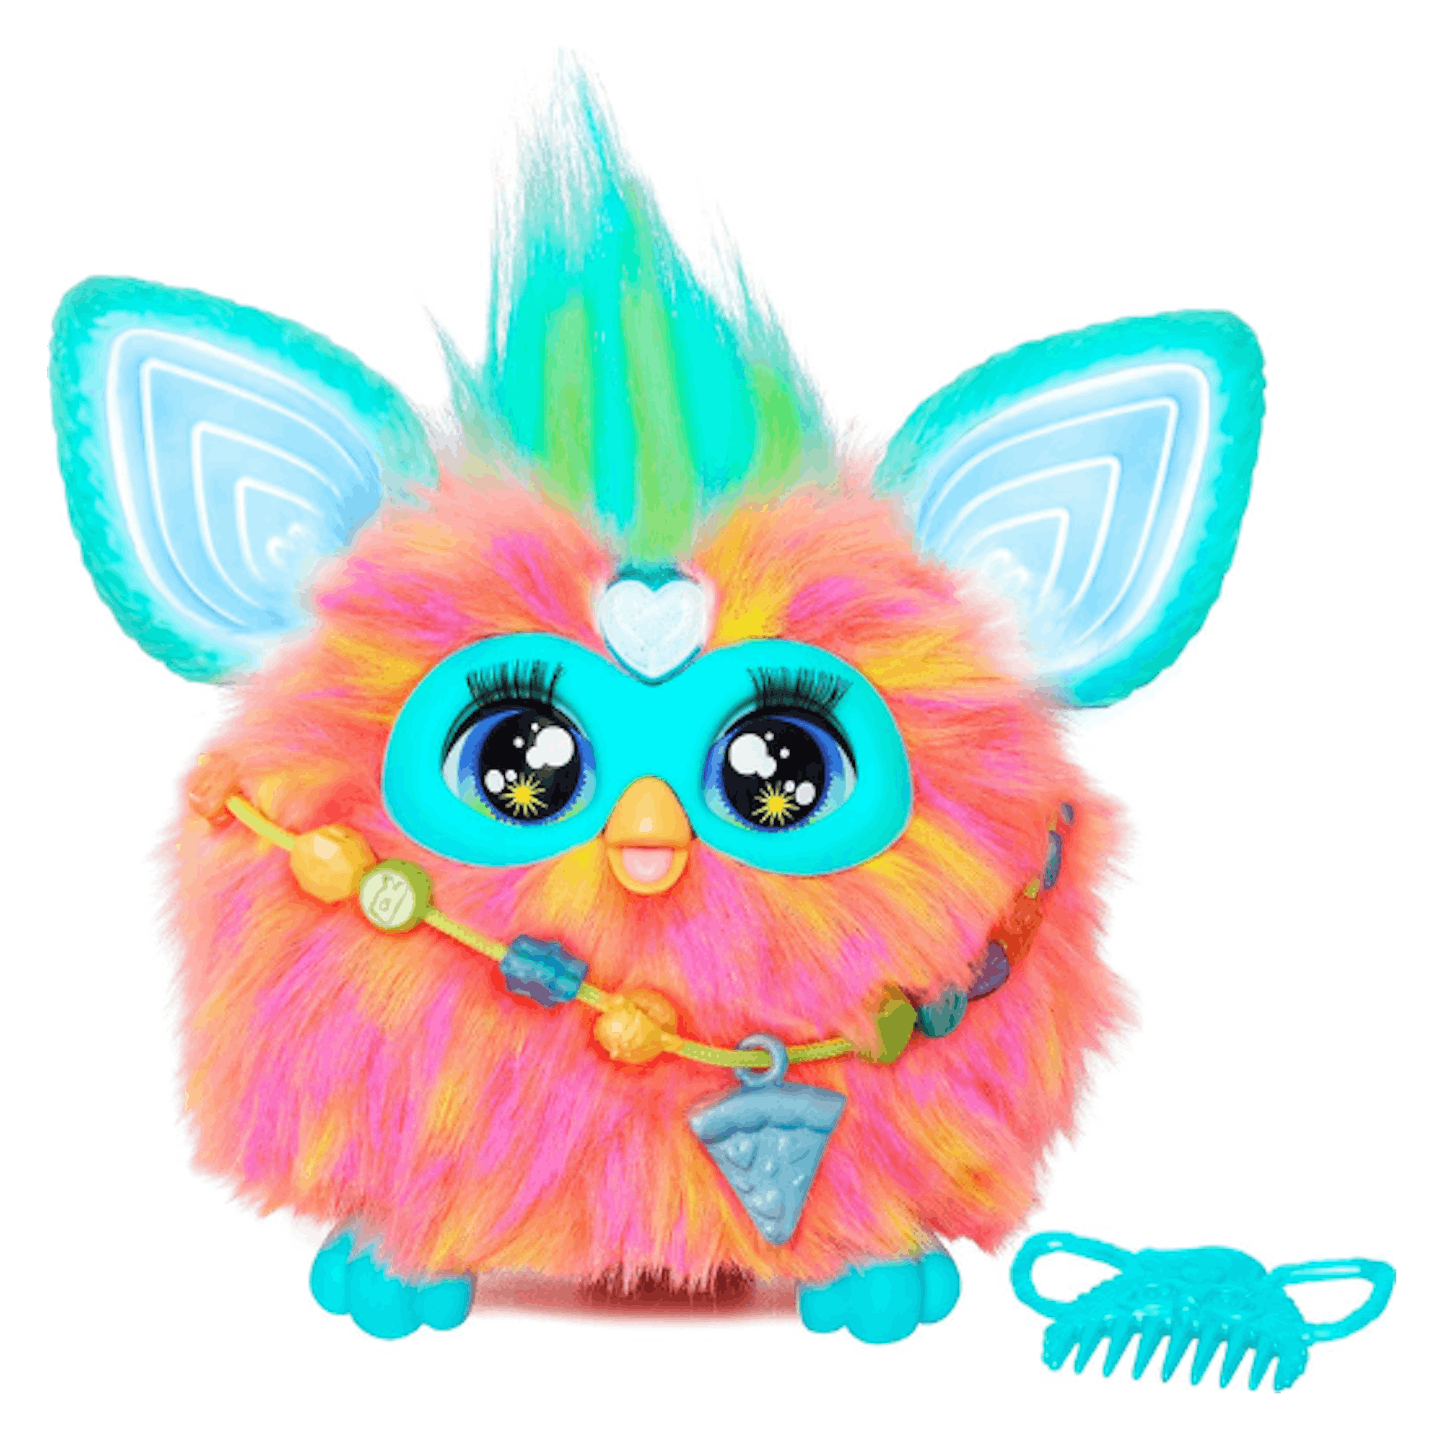 Best toys for 5 year olds Furby Hasbro Coral Interactive Toy 